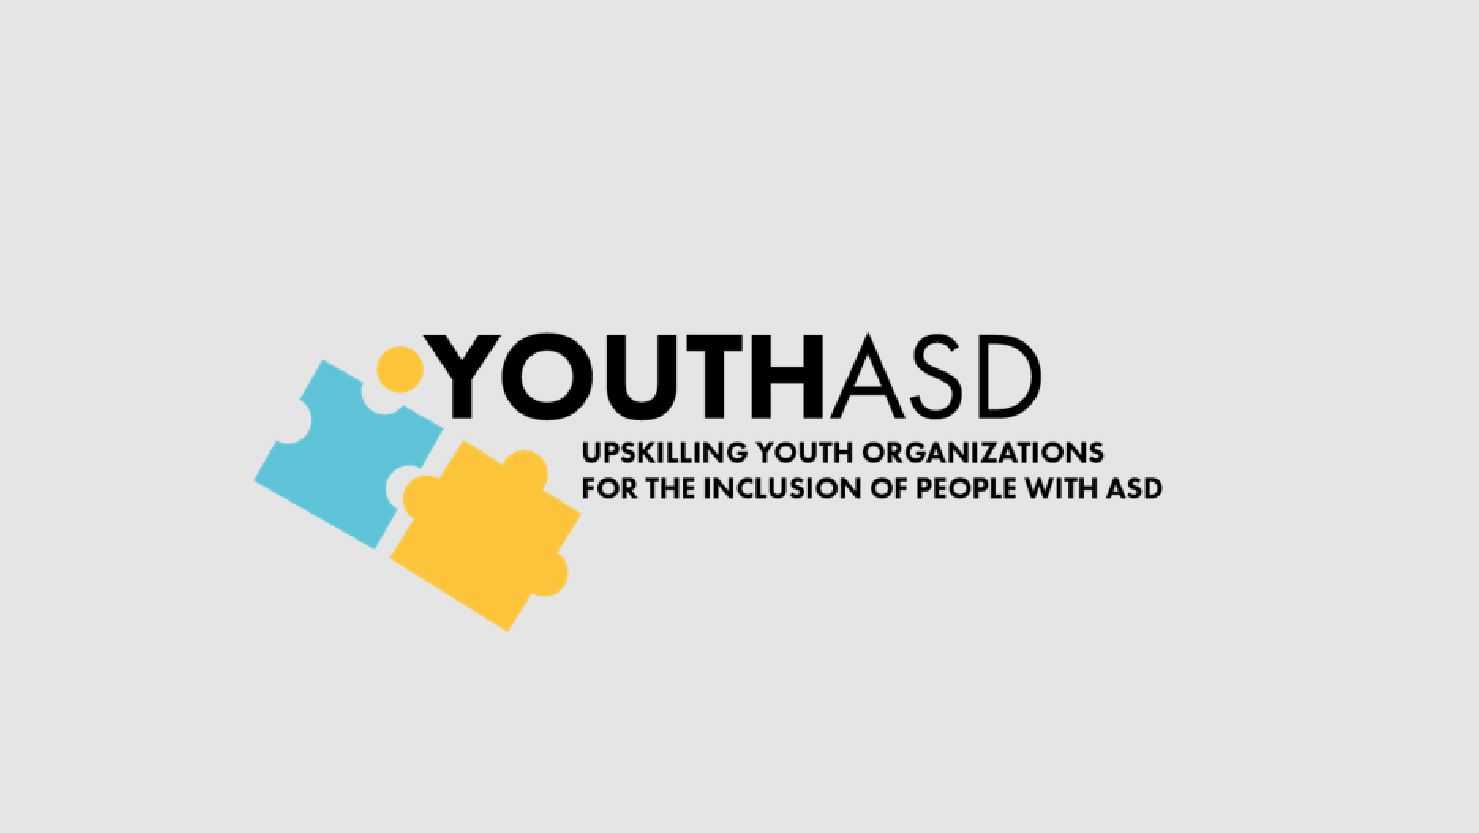 Upskilling youth organizations for the inclusion of people with ASD